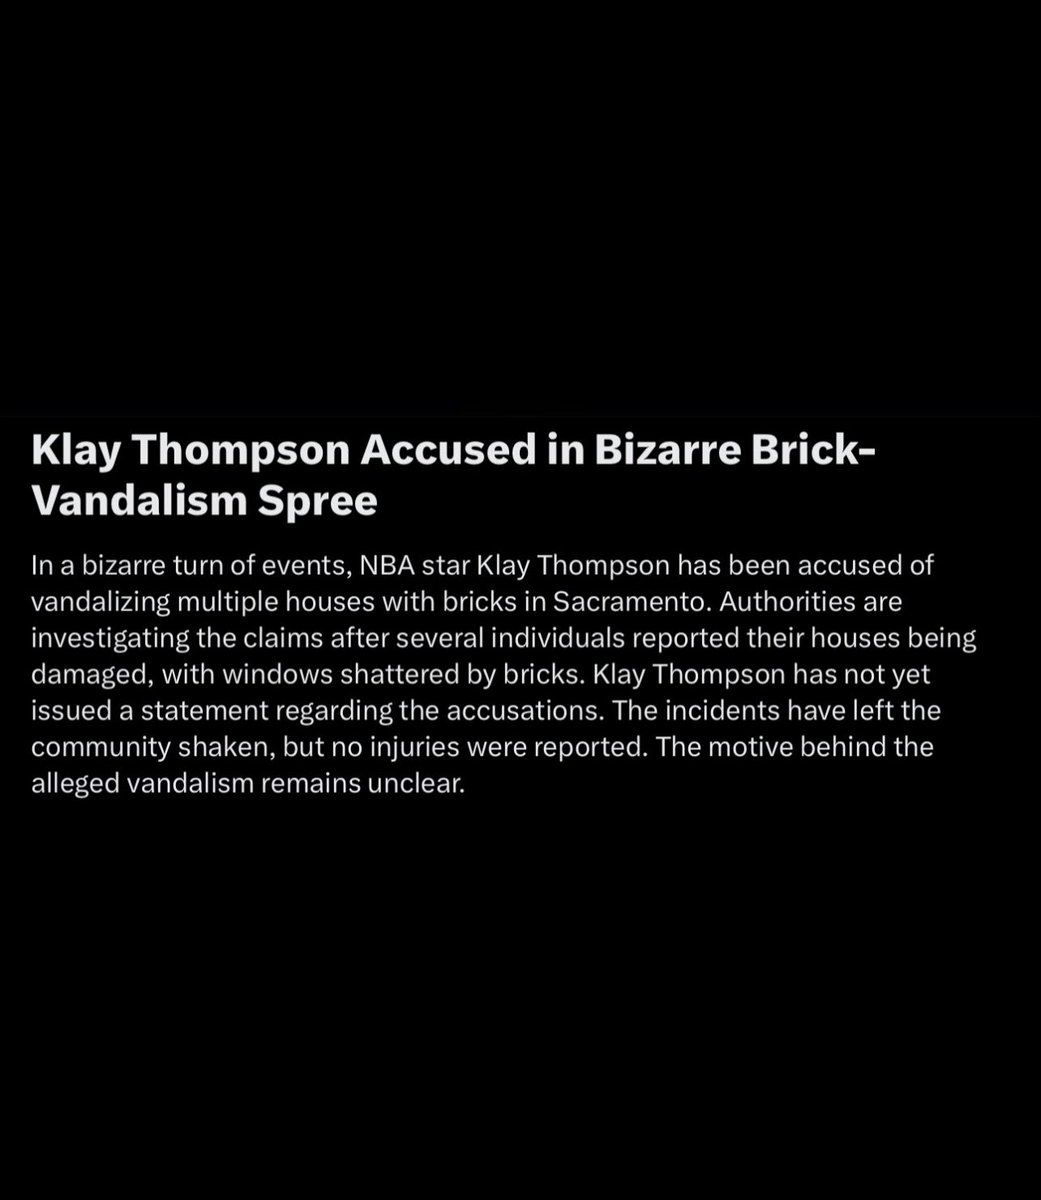 Twitter’s new AI-powered trending tab thinks Klay Thompson is being accused of vandalizing houses with bricks This comes after shooting 0-10 against the Kings